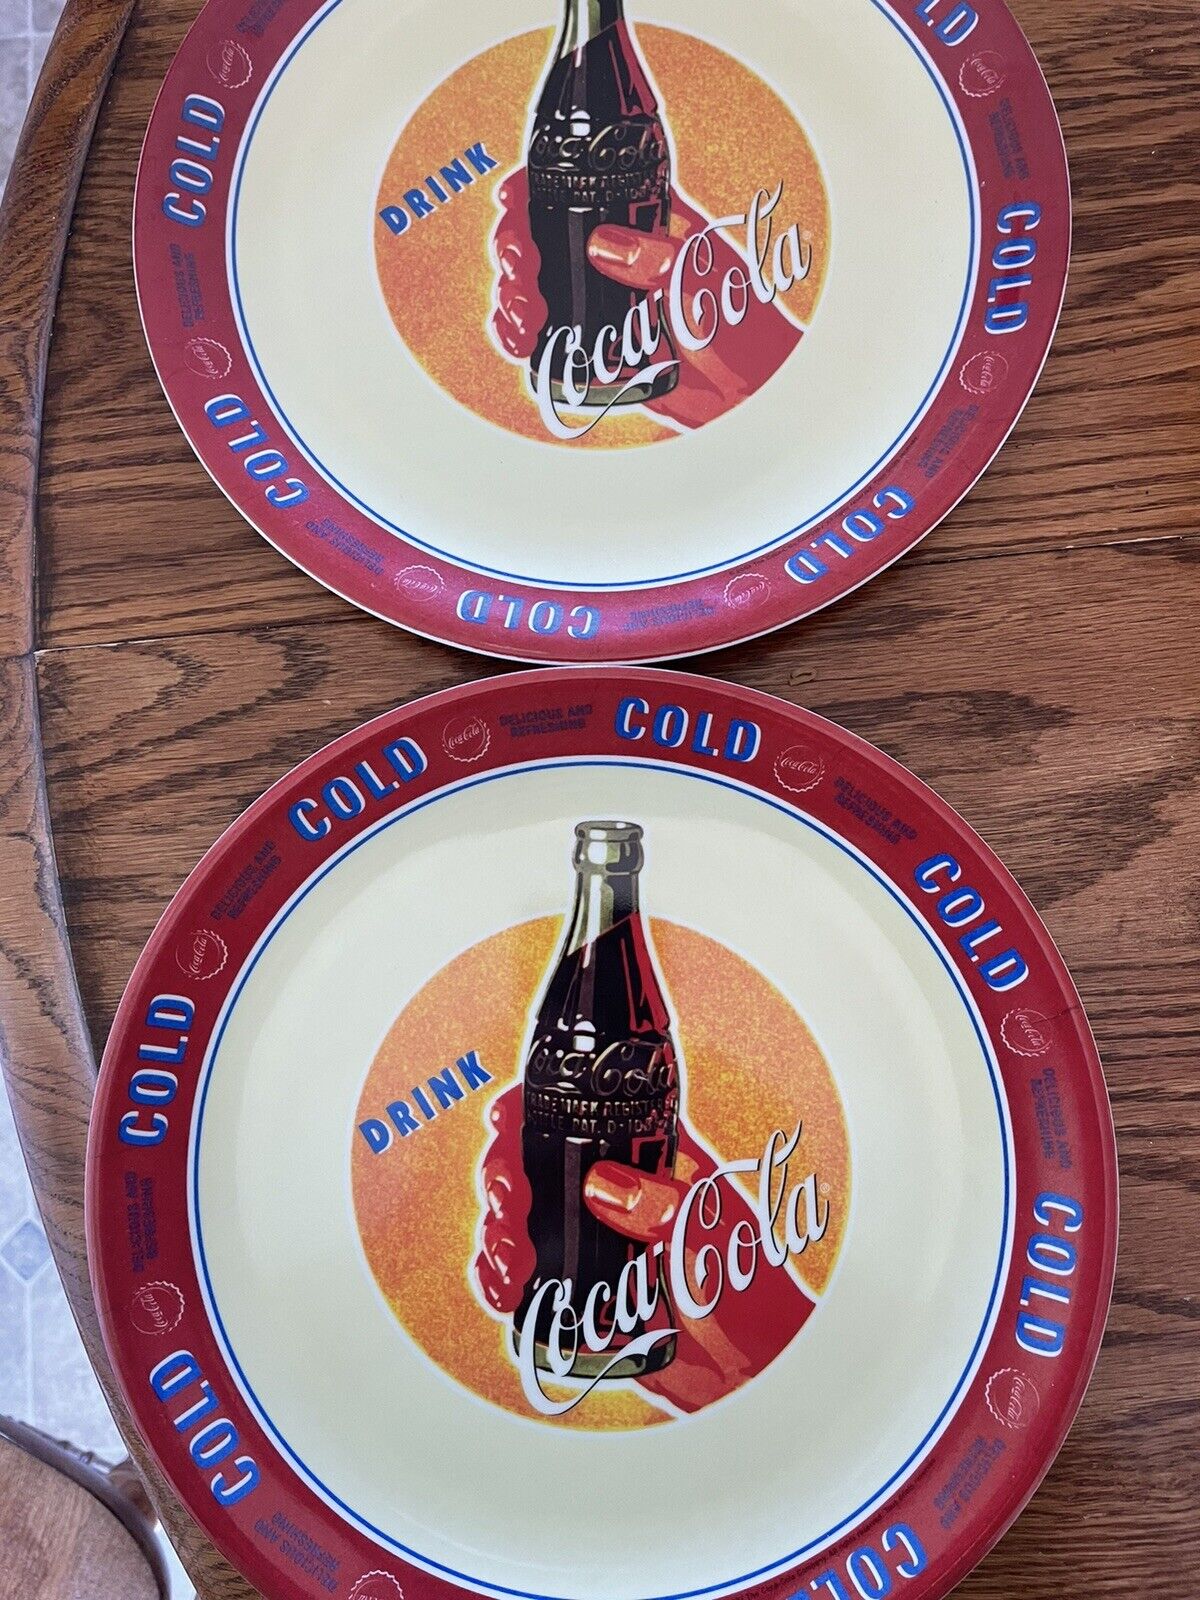 (2) 2002 Coca Cola Plastic Plate Made By Gibson